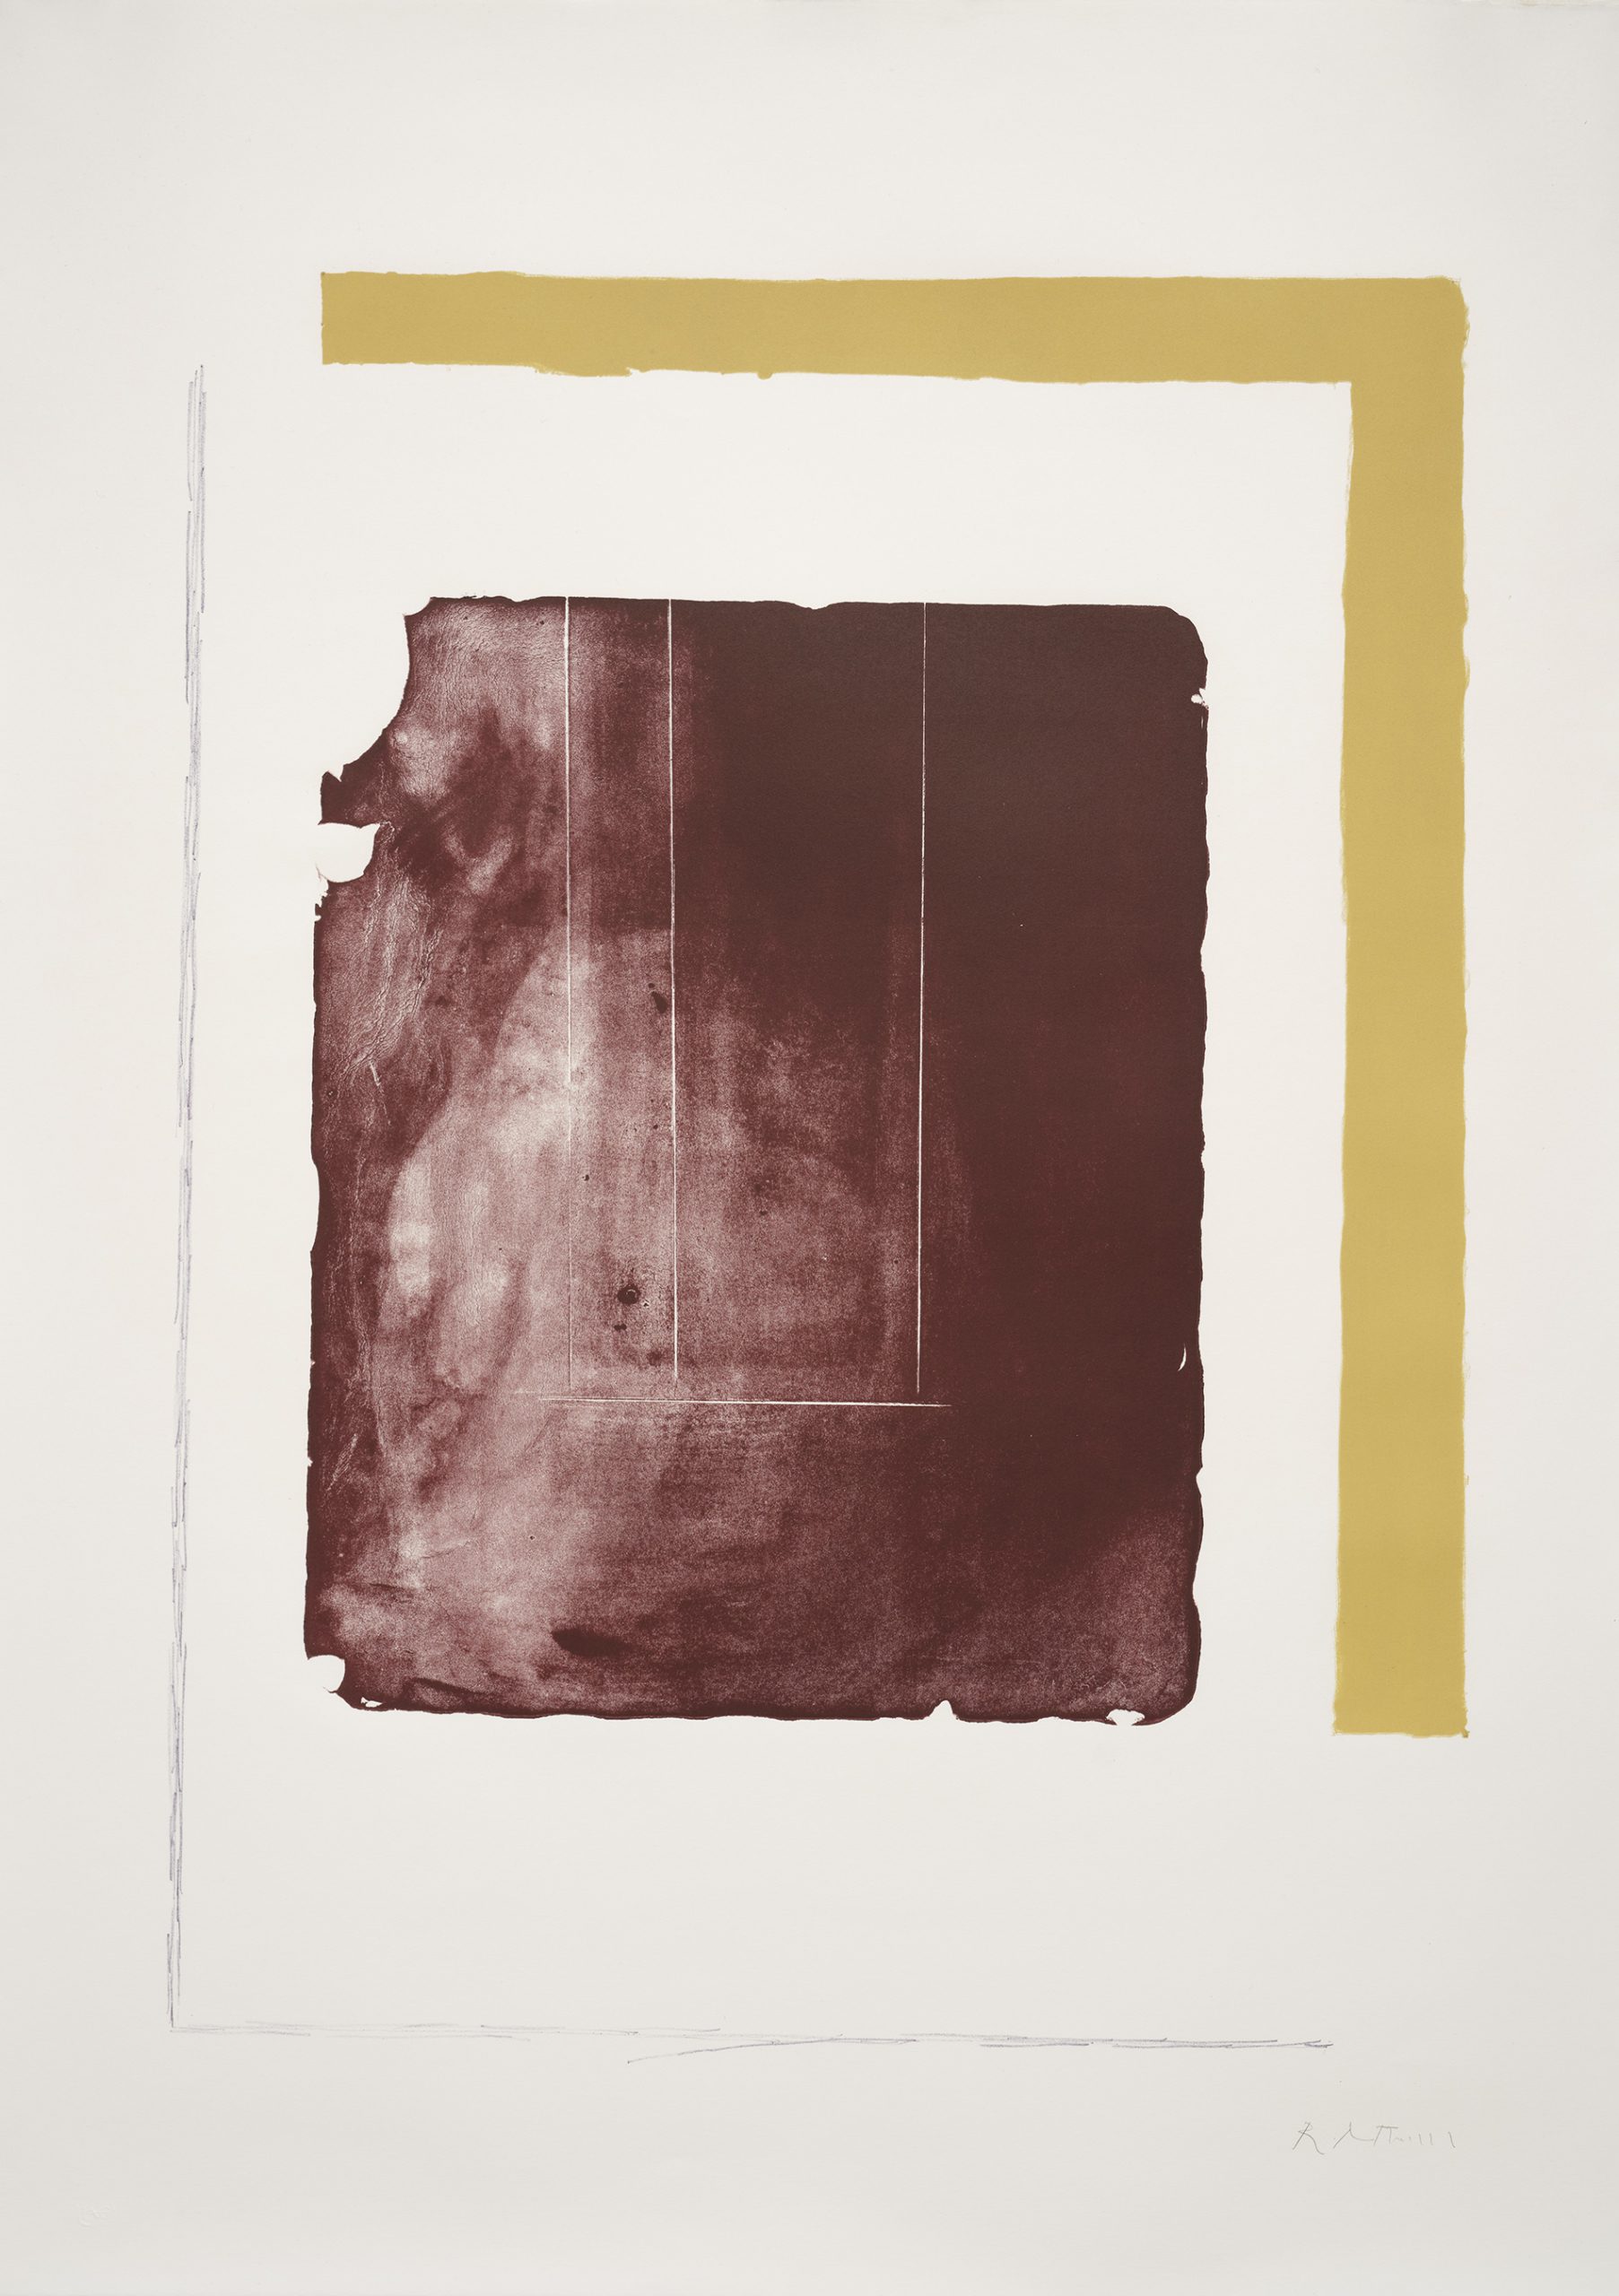 The Celtic Stone by Robert Motherwell